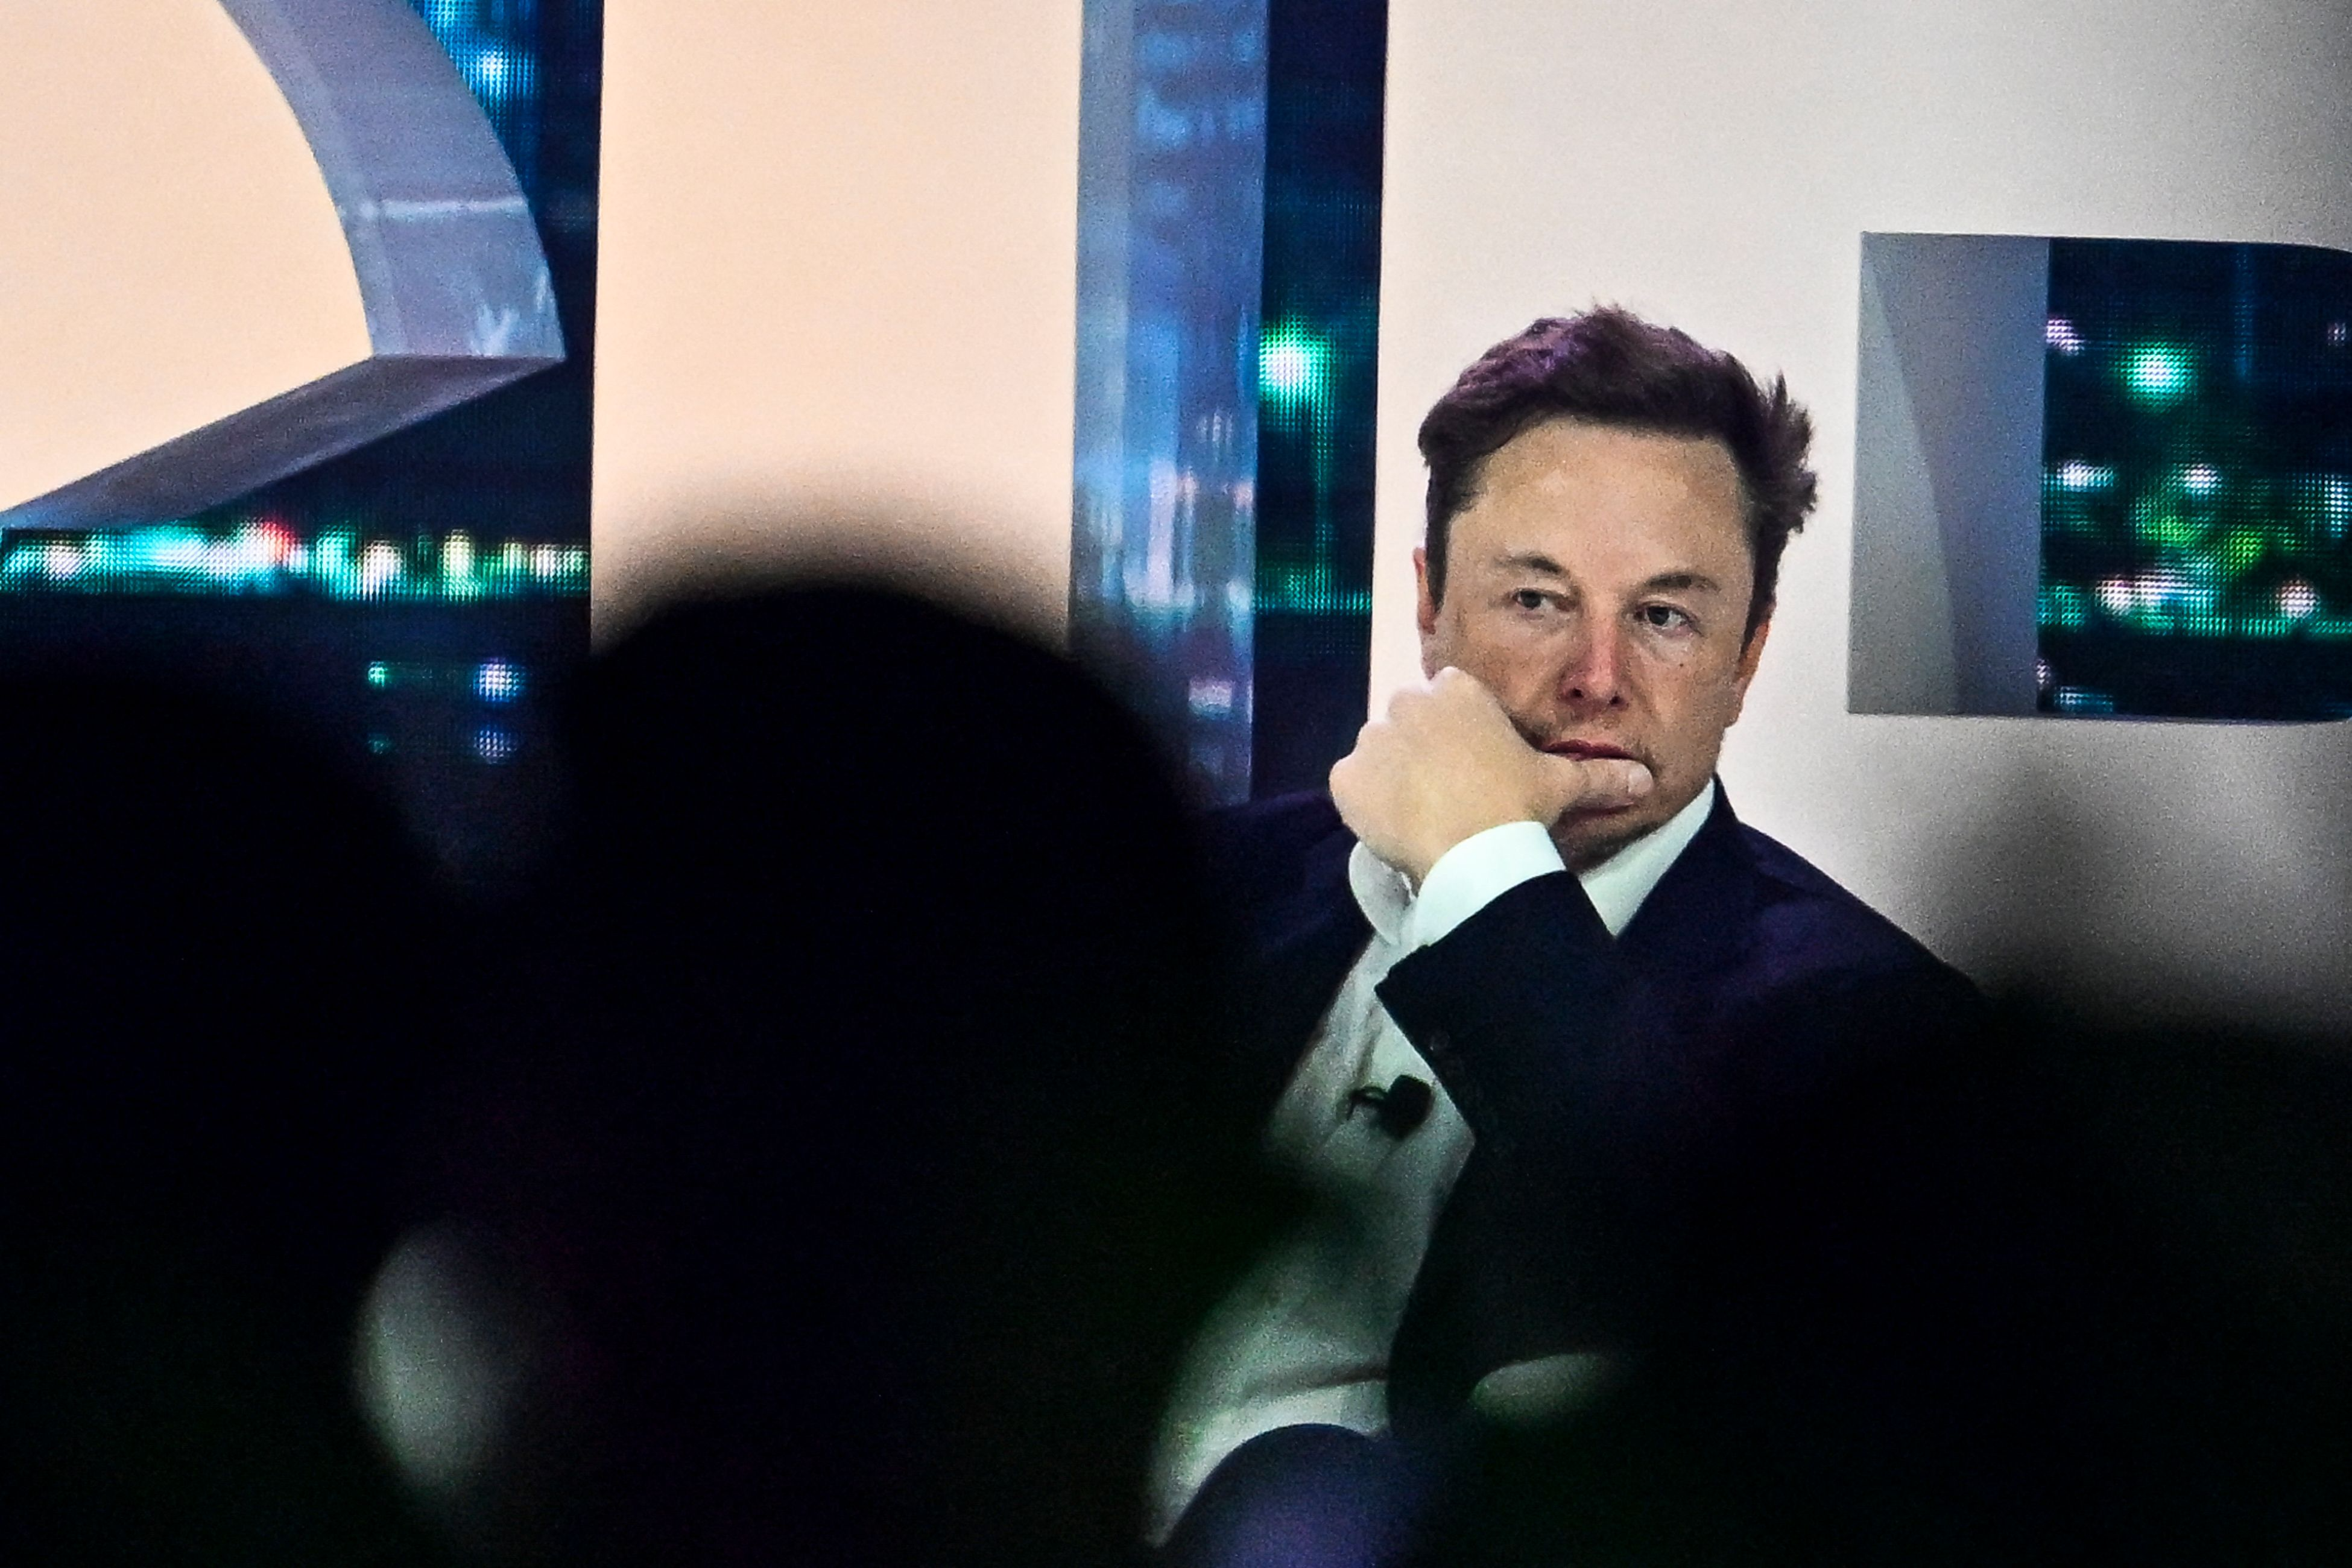 Elon Musk sitting down at conference talking about twitter 2.0